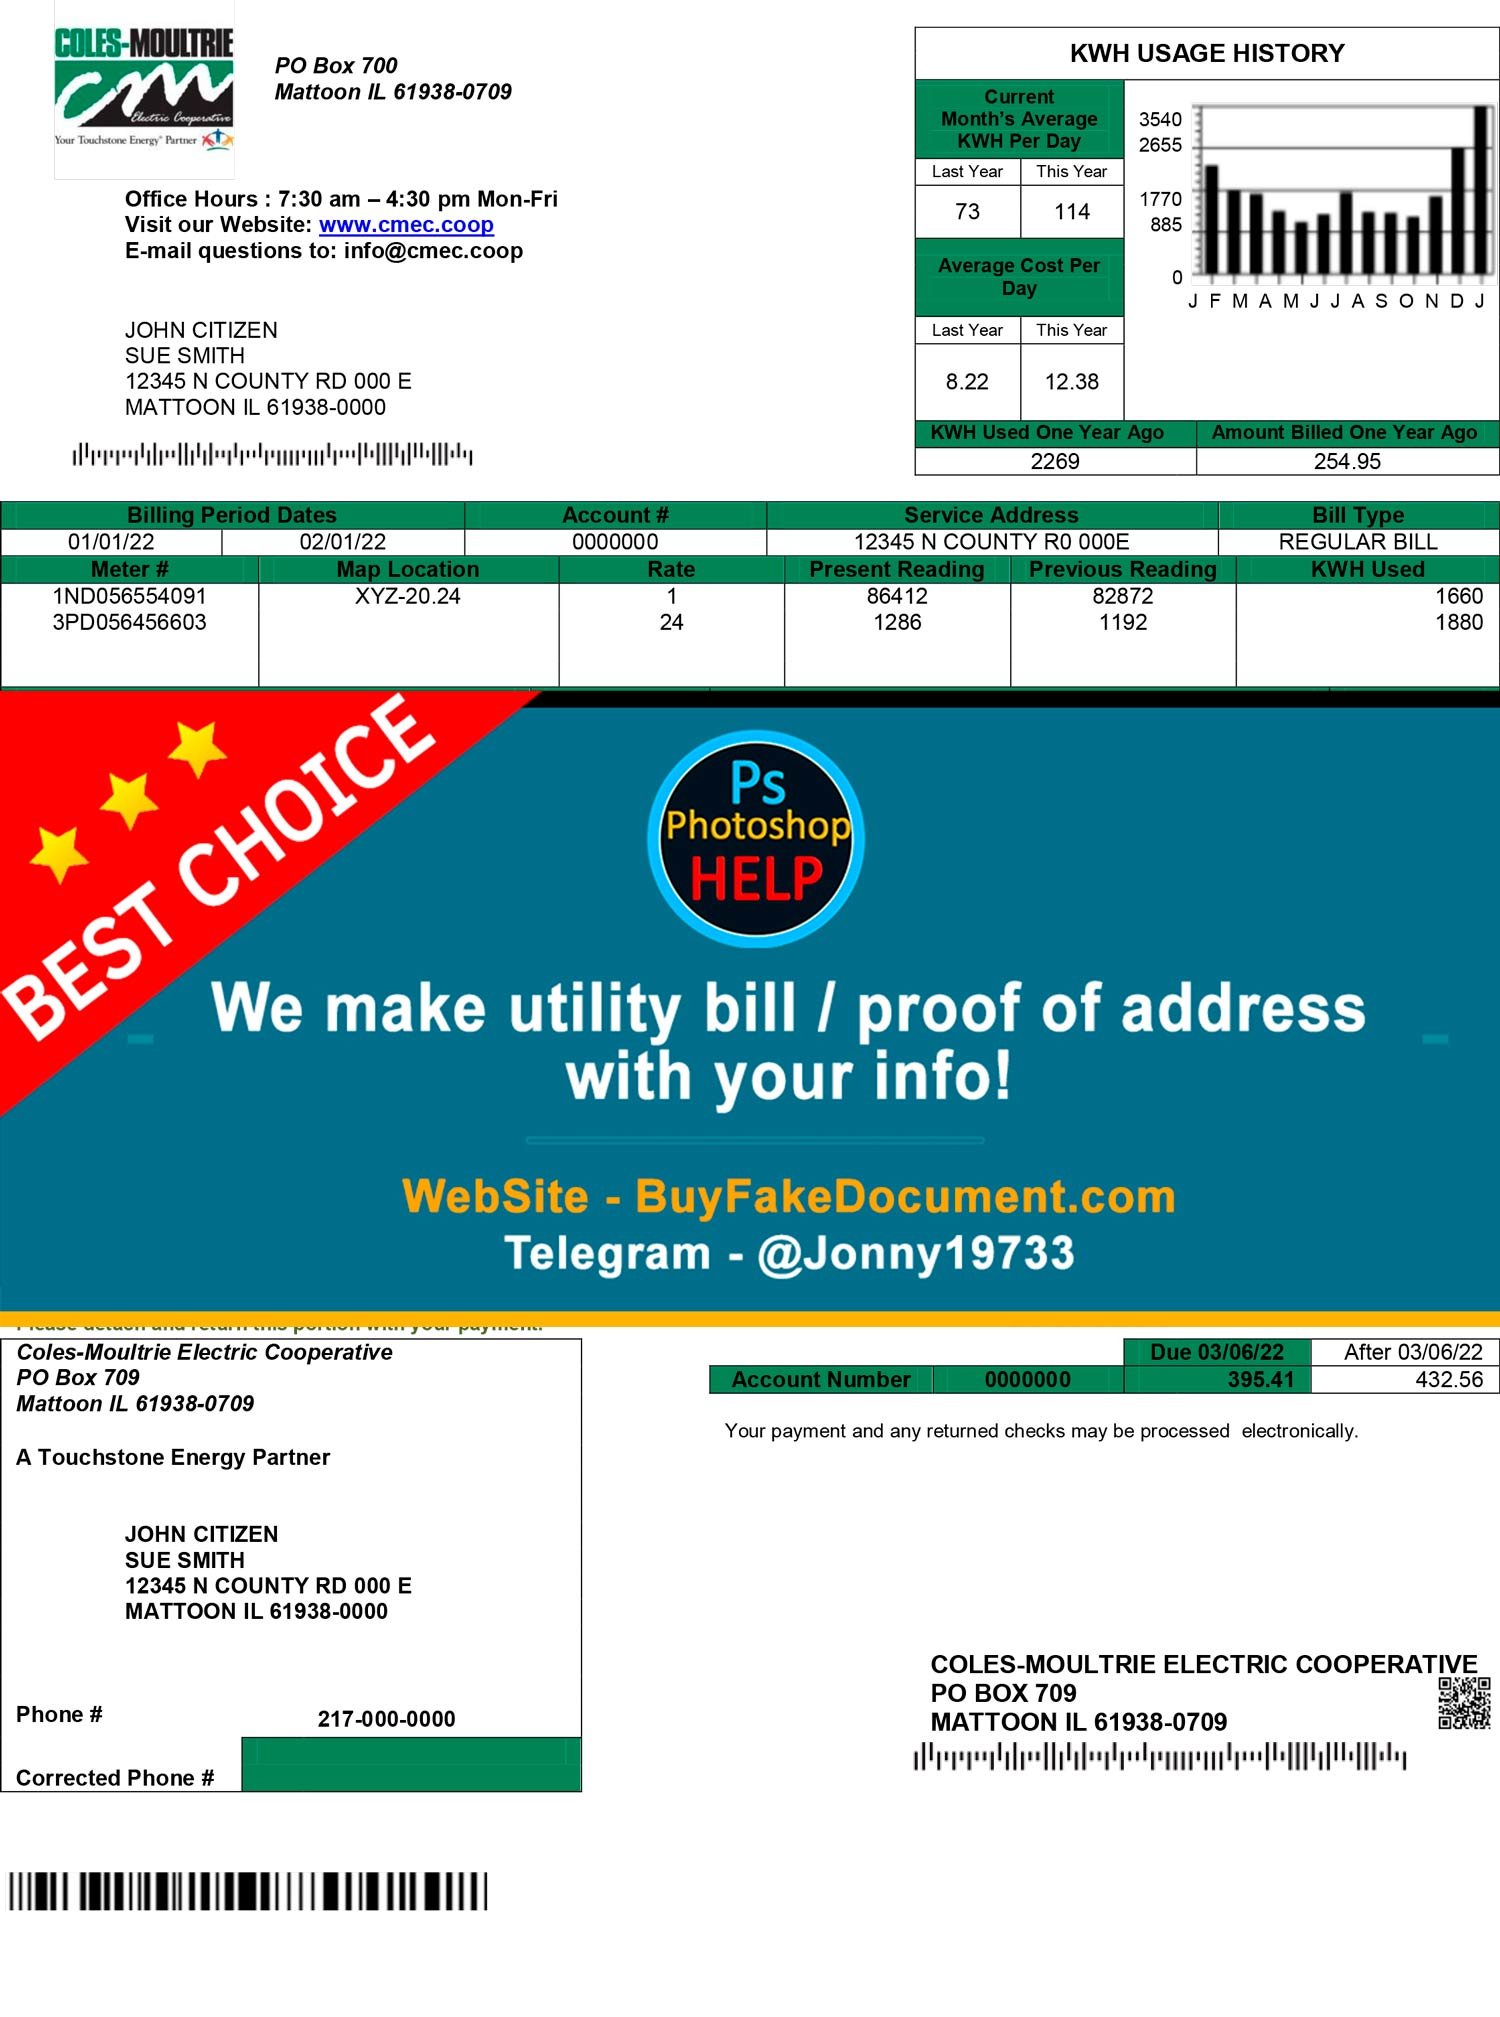 Illinois Coles Moultrie Fake Utility bill